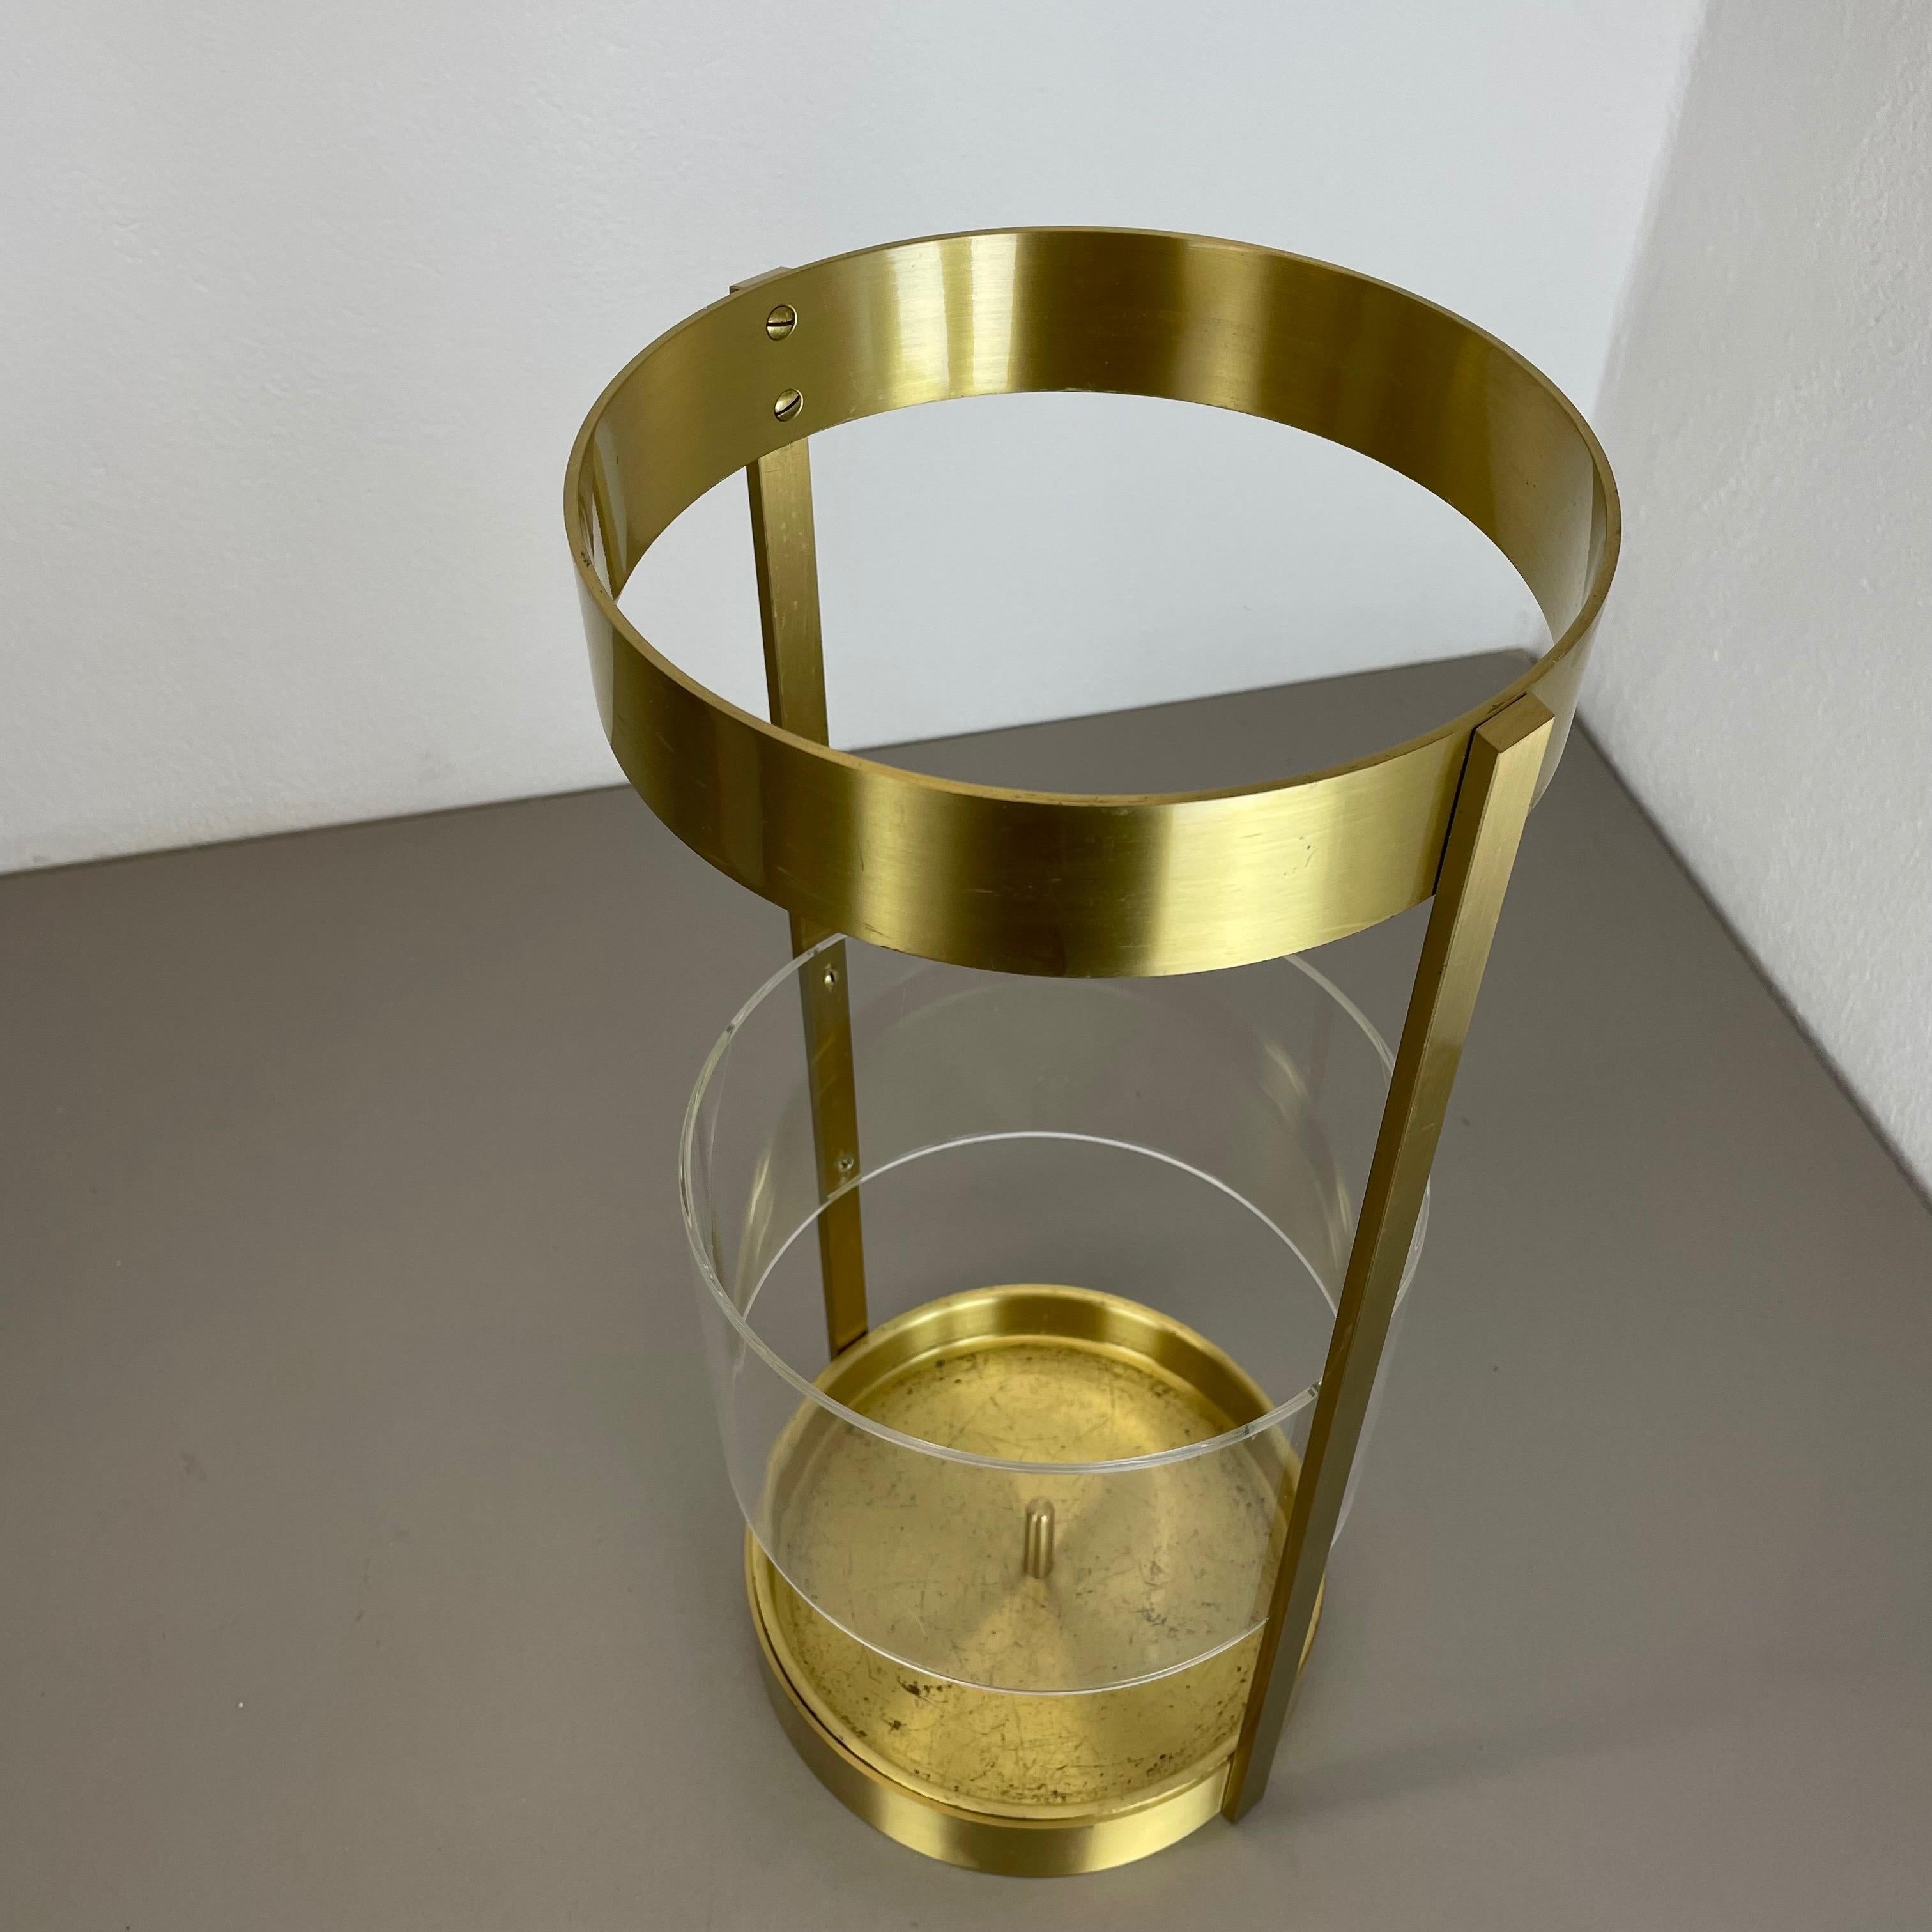 Original Hollywood Regency Solid Brass Acryl Glass Umbrella Stand, Italy, 1970s For Sale 8